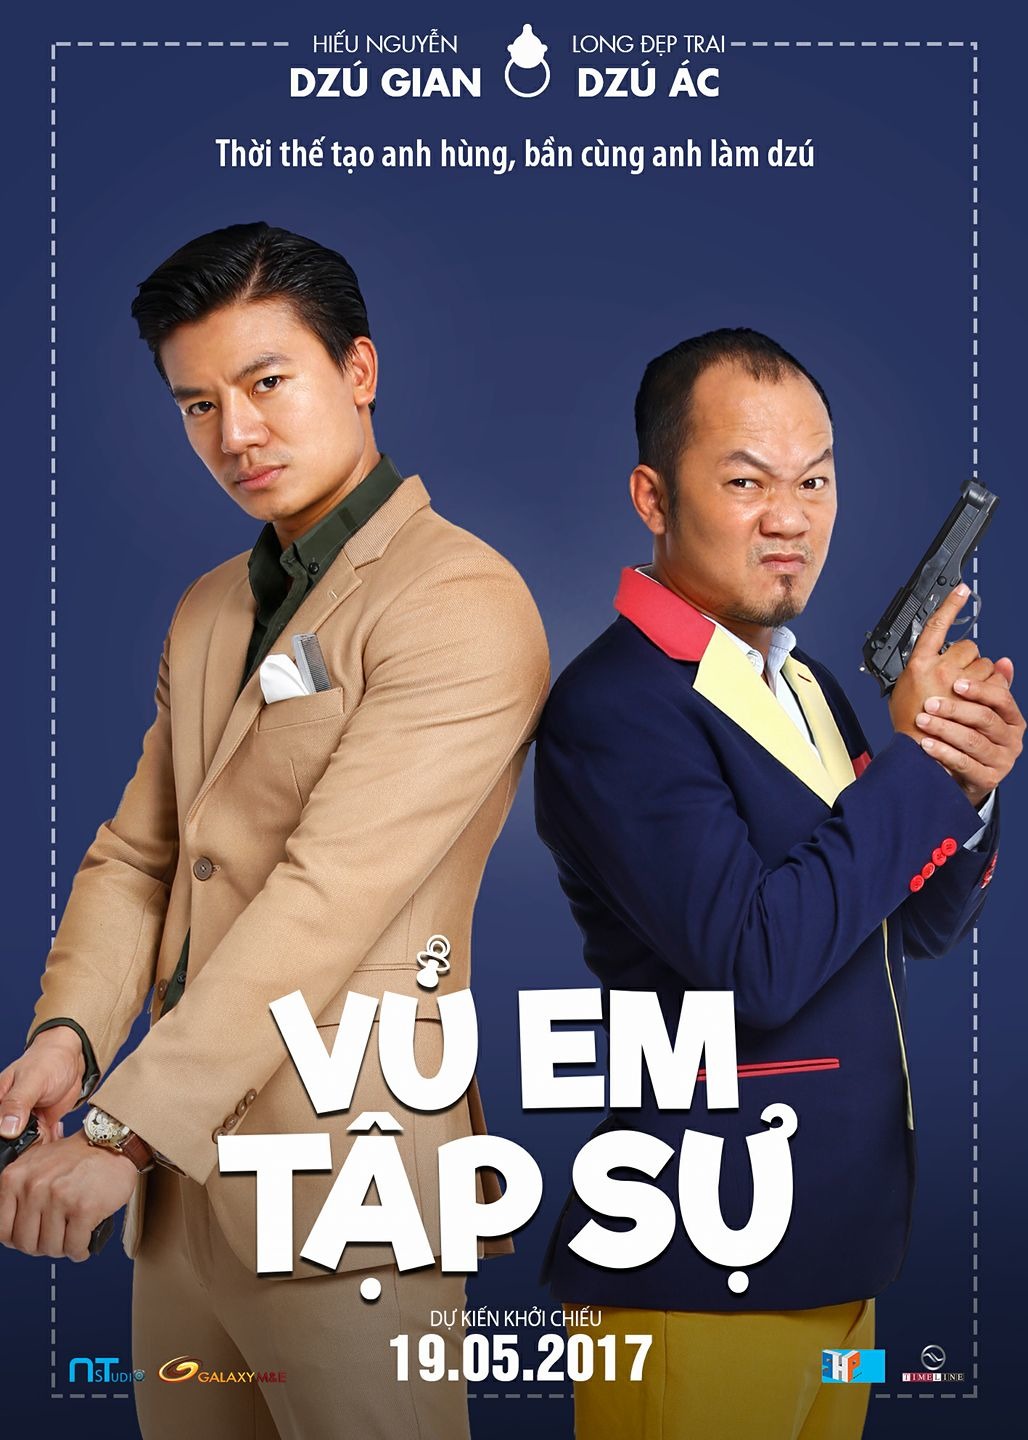 Extra Large Movie Poster Image for Vu em tap su (#5 of 6)